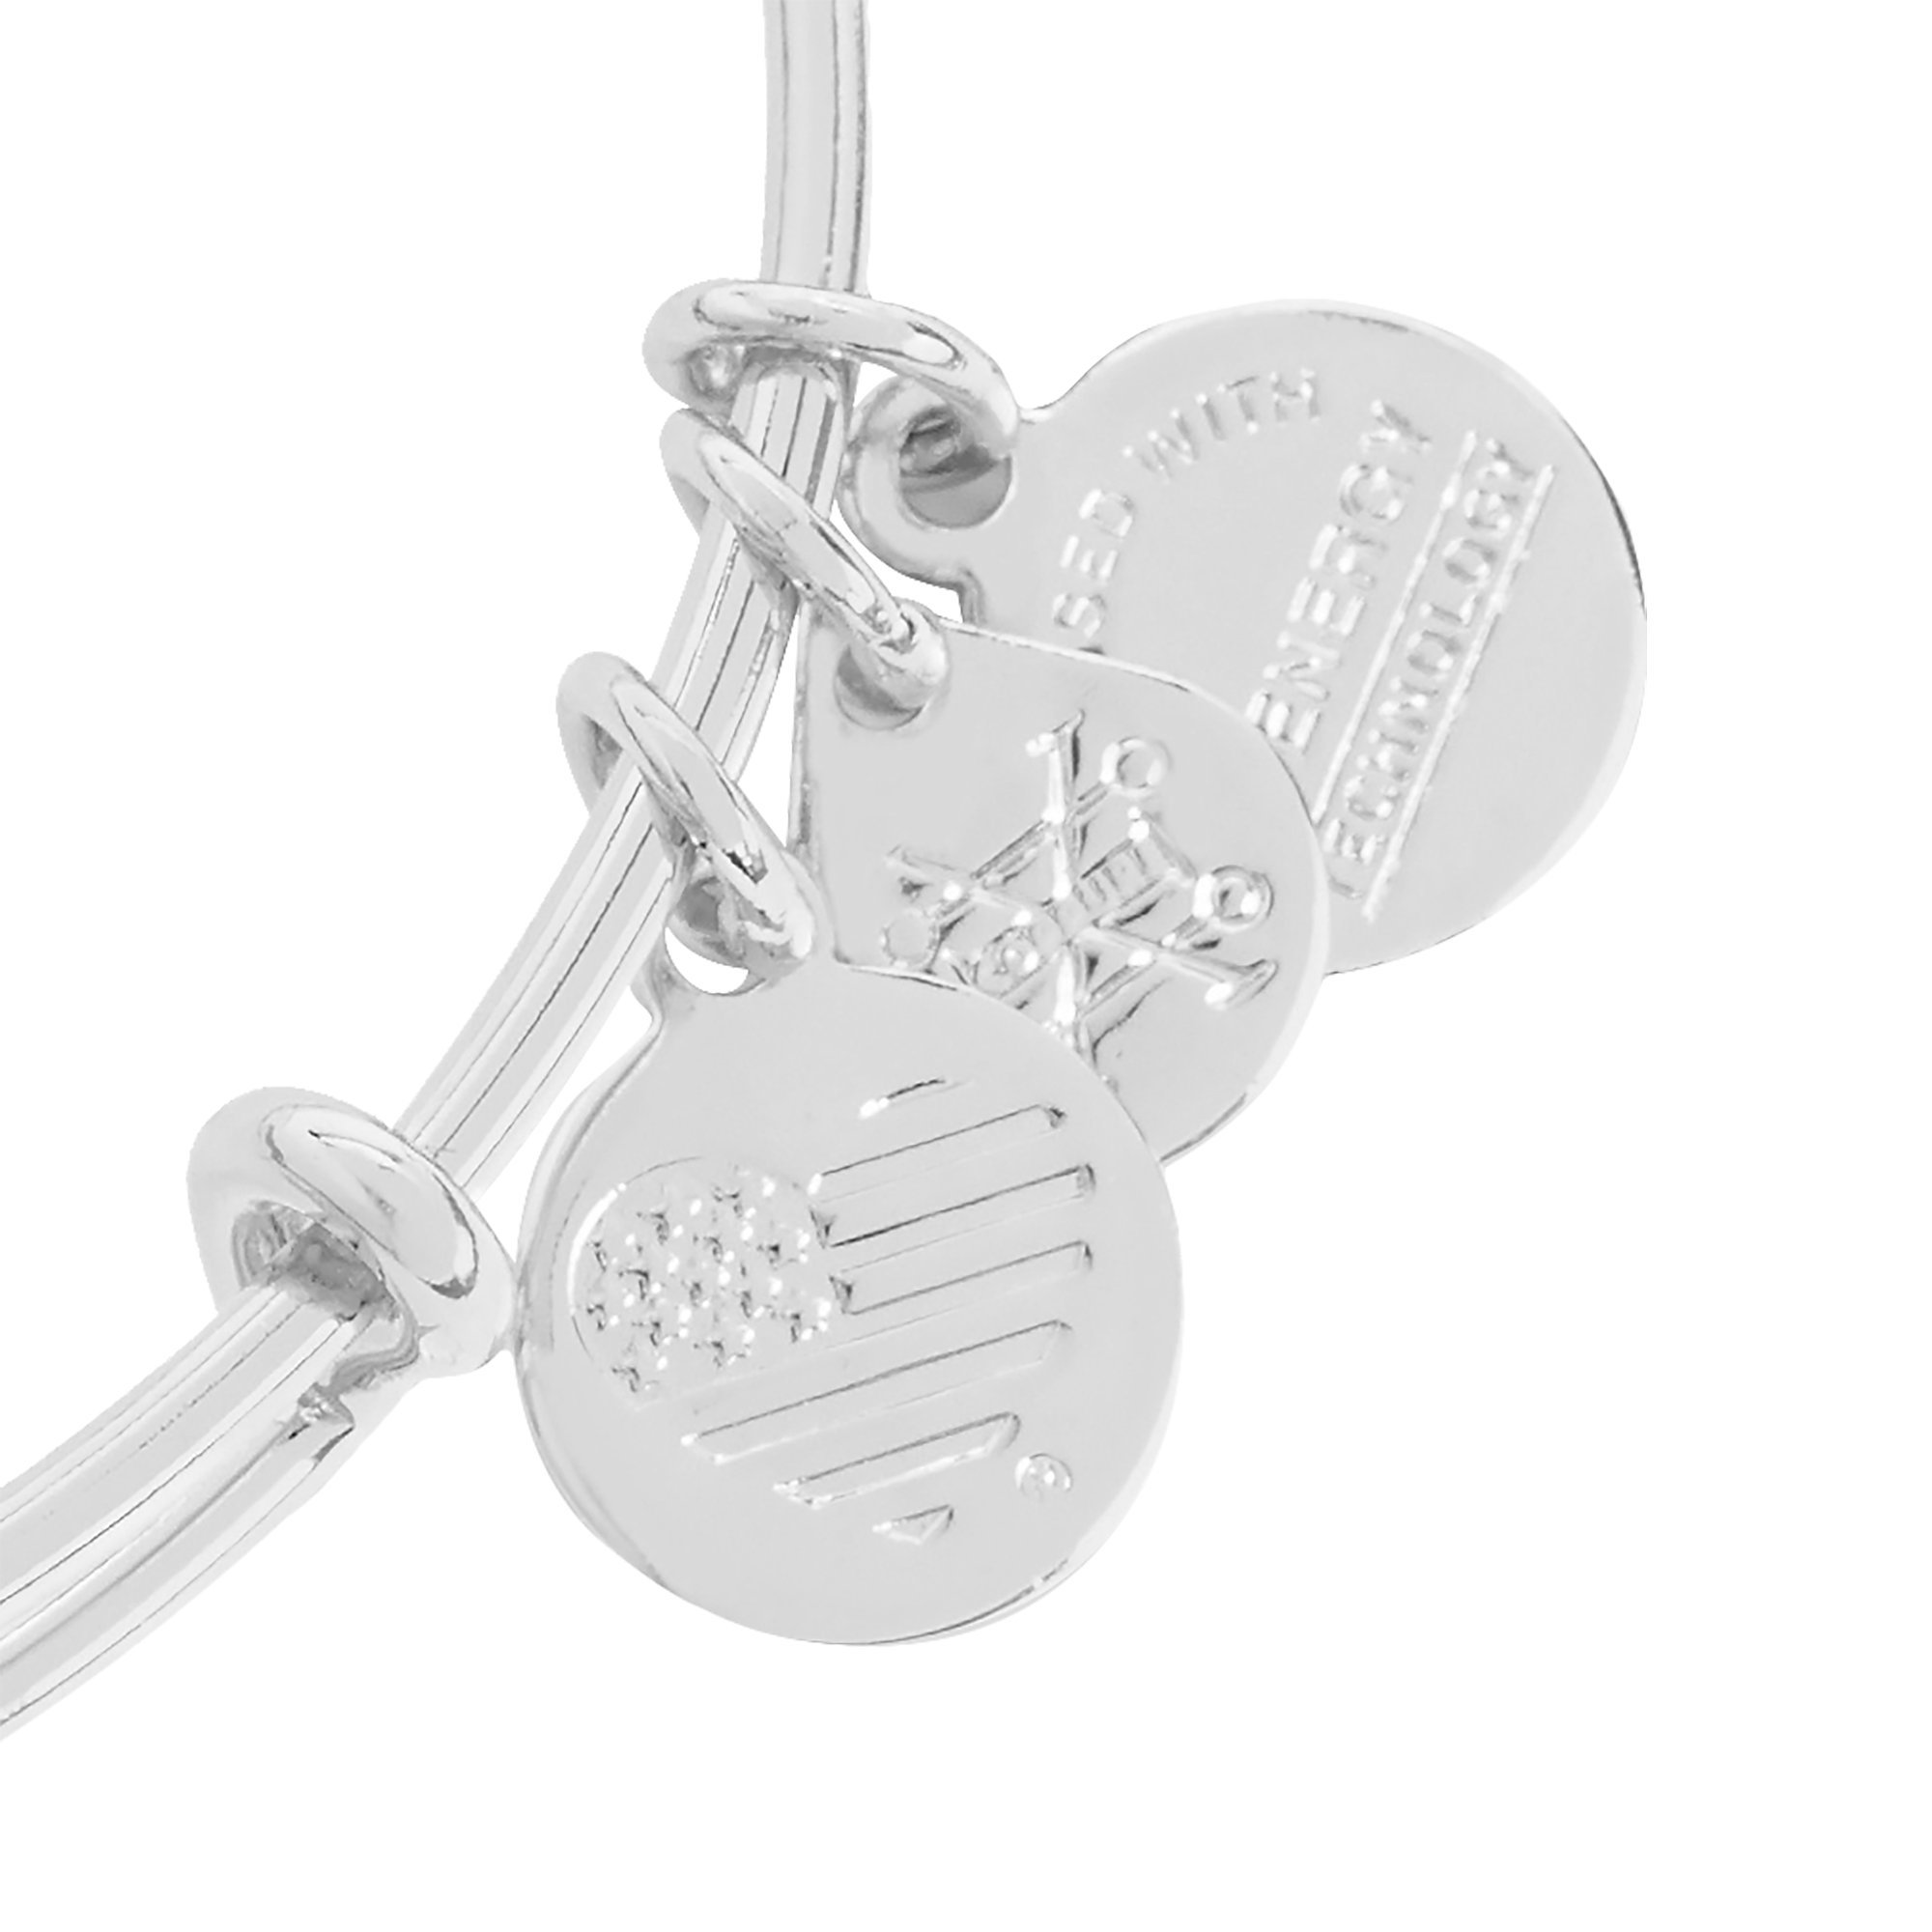 Mickey Mouse Bangle by Alex and Ani